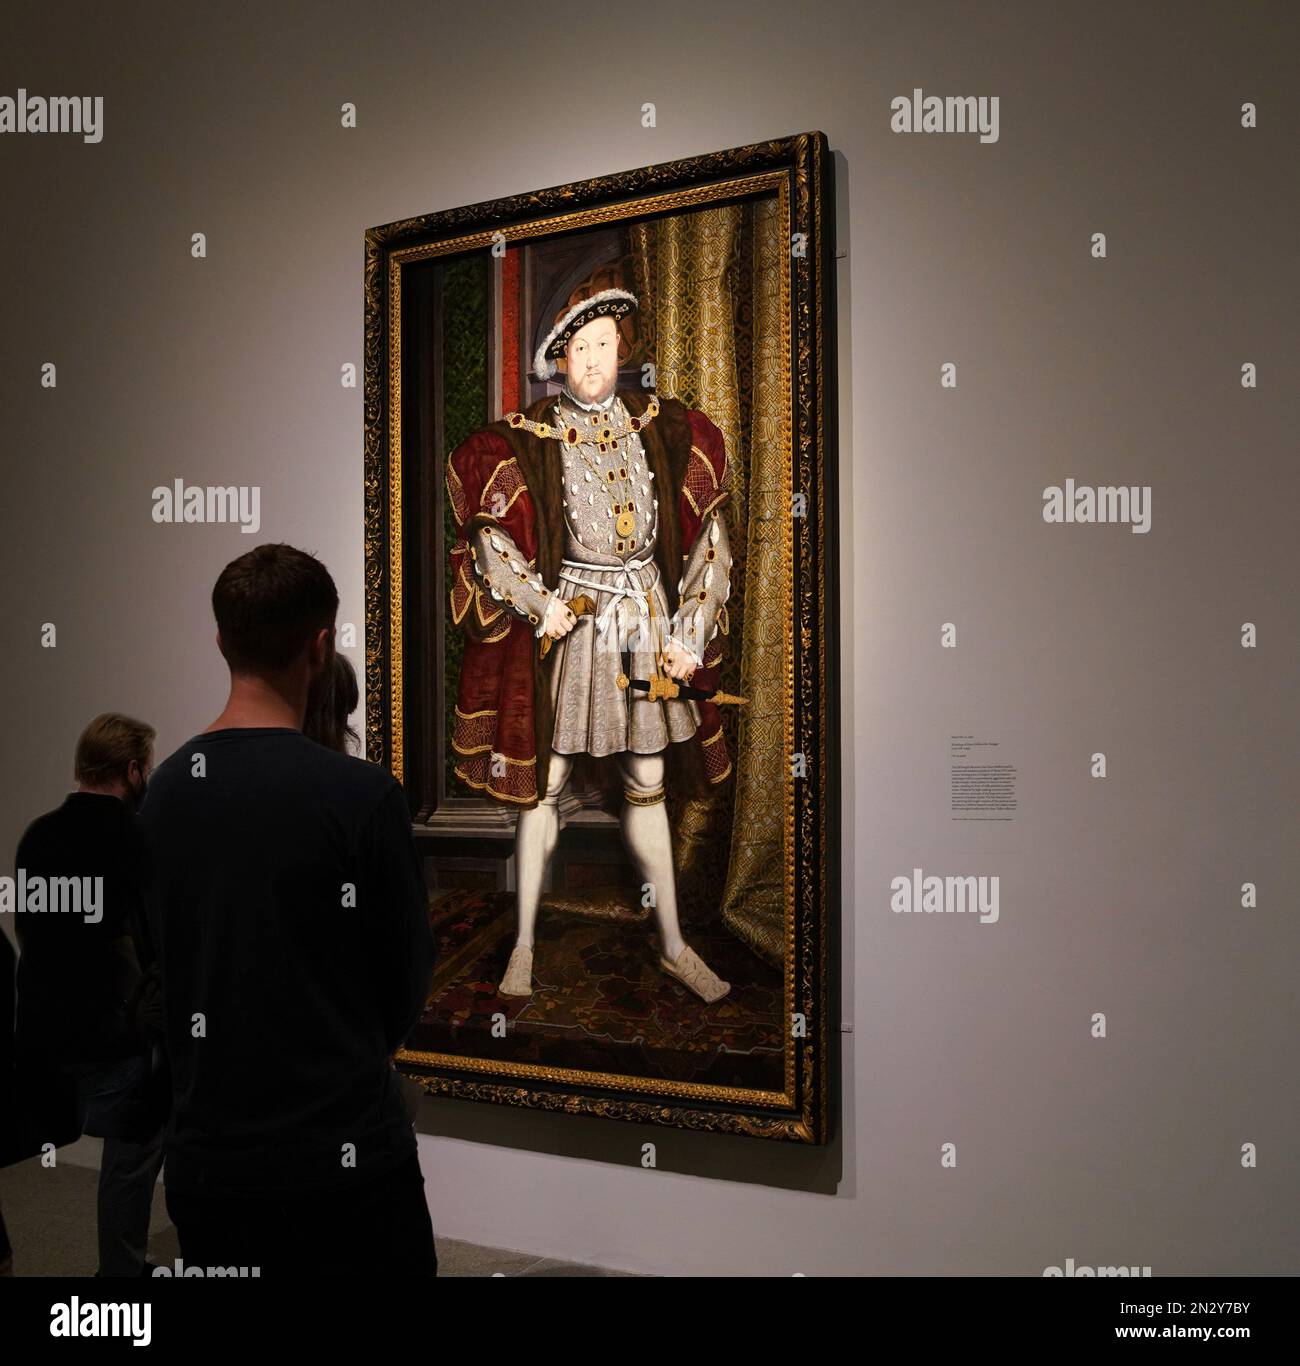 New York, NY - October 2022:  Visitors to the Met's Tudor Gallery admire a full length portrait of King Henry VIII, by Hans Holbein, circa 1540. Stock Photo